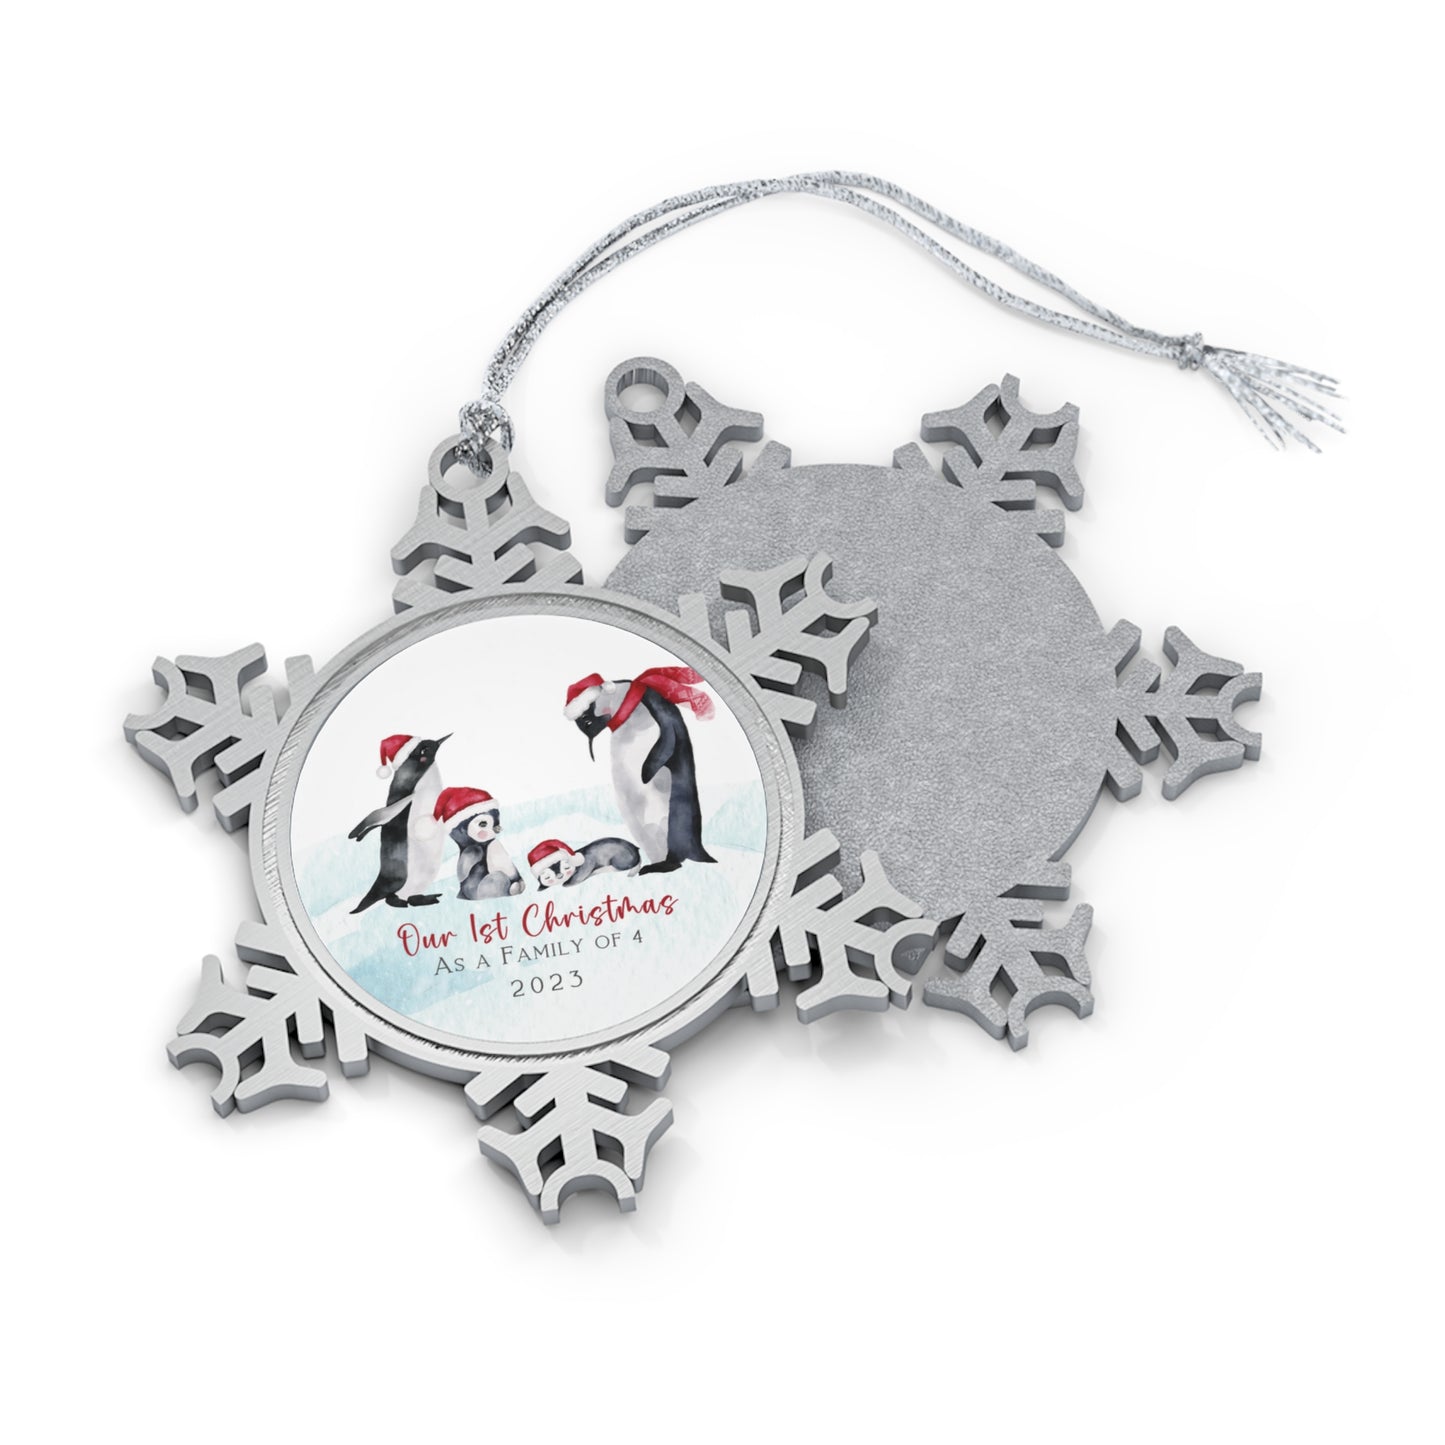 Personalised Pewter Snowflake Ornament | Penguin Family of 4